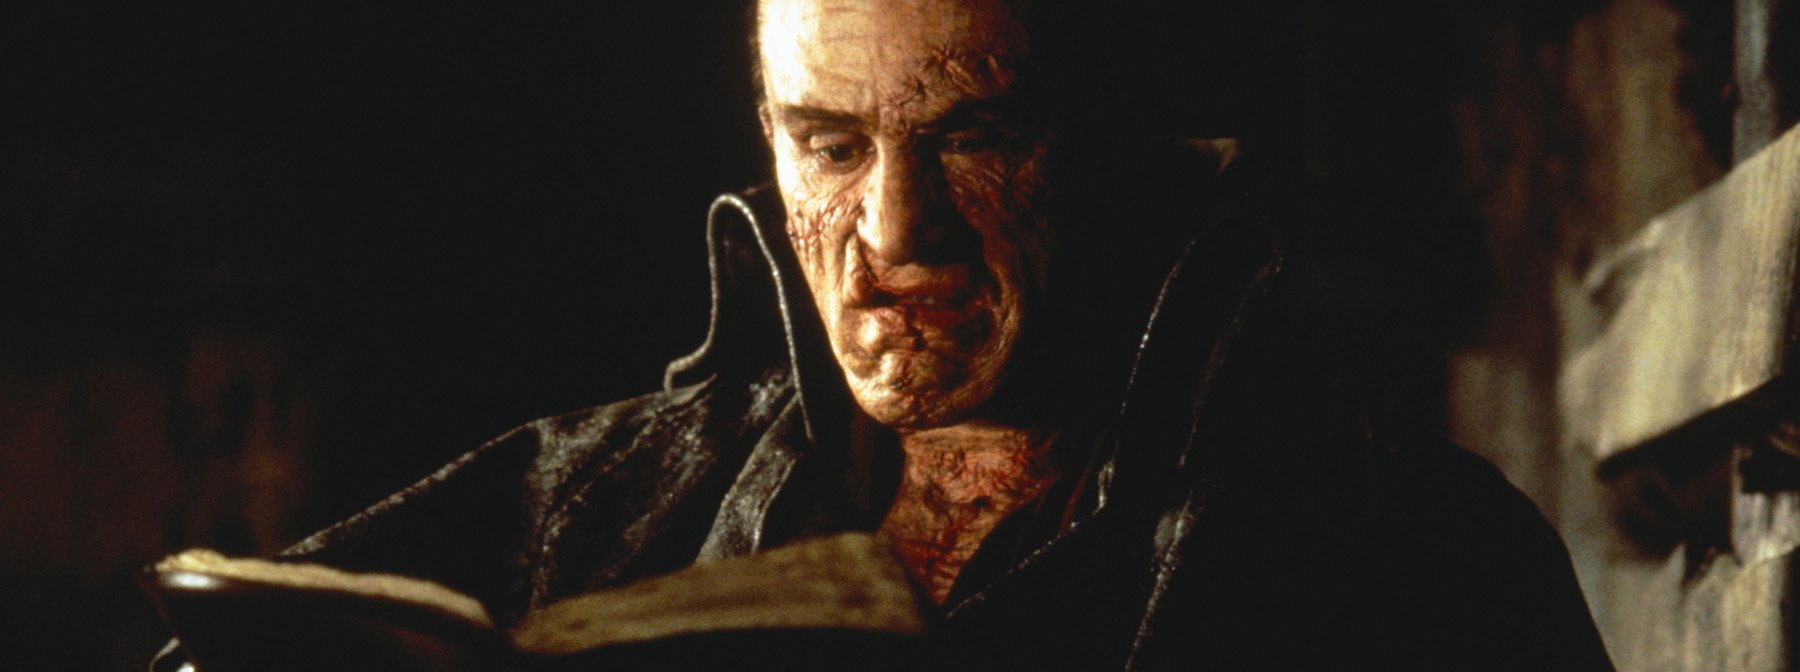 The Creation (Robert De Niro) reading a book in Mary Shelley's Frankenstein (1994)